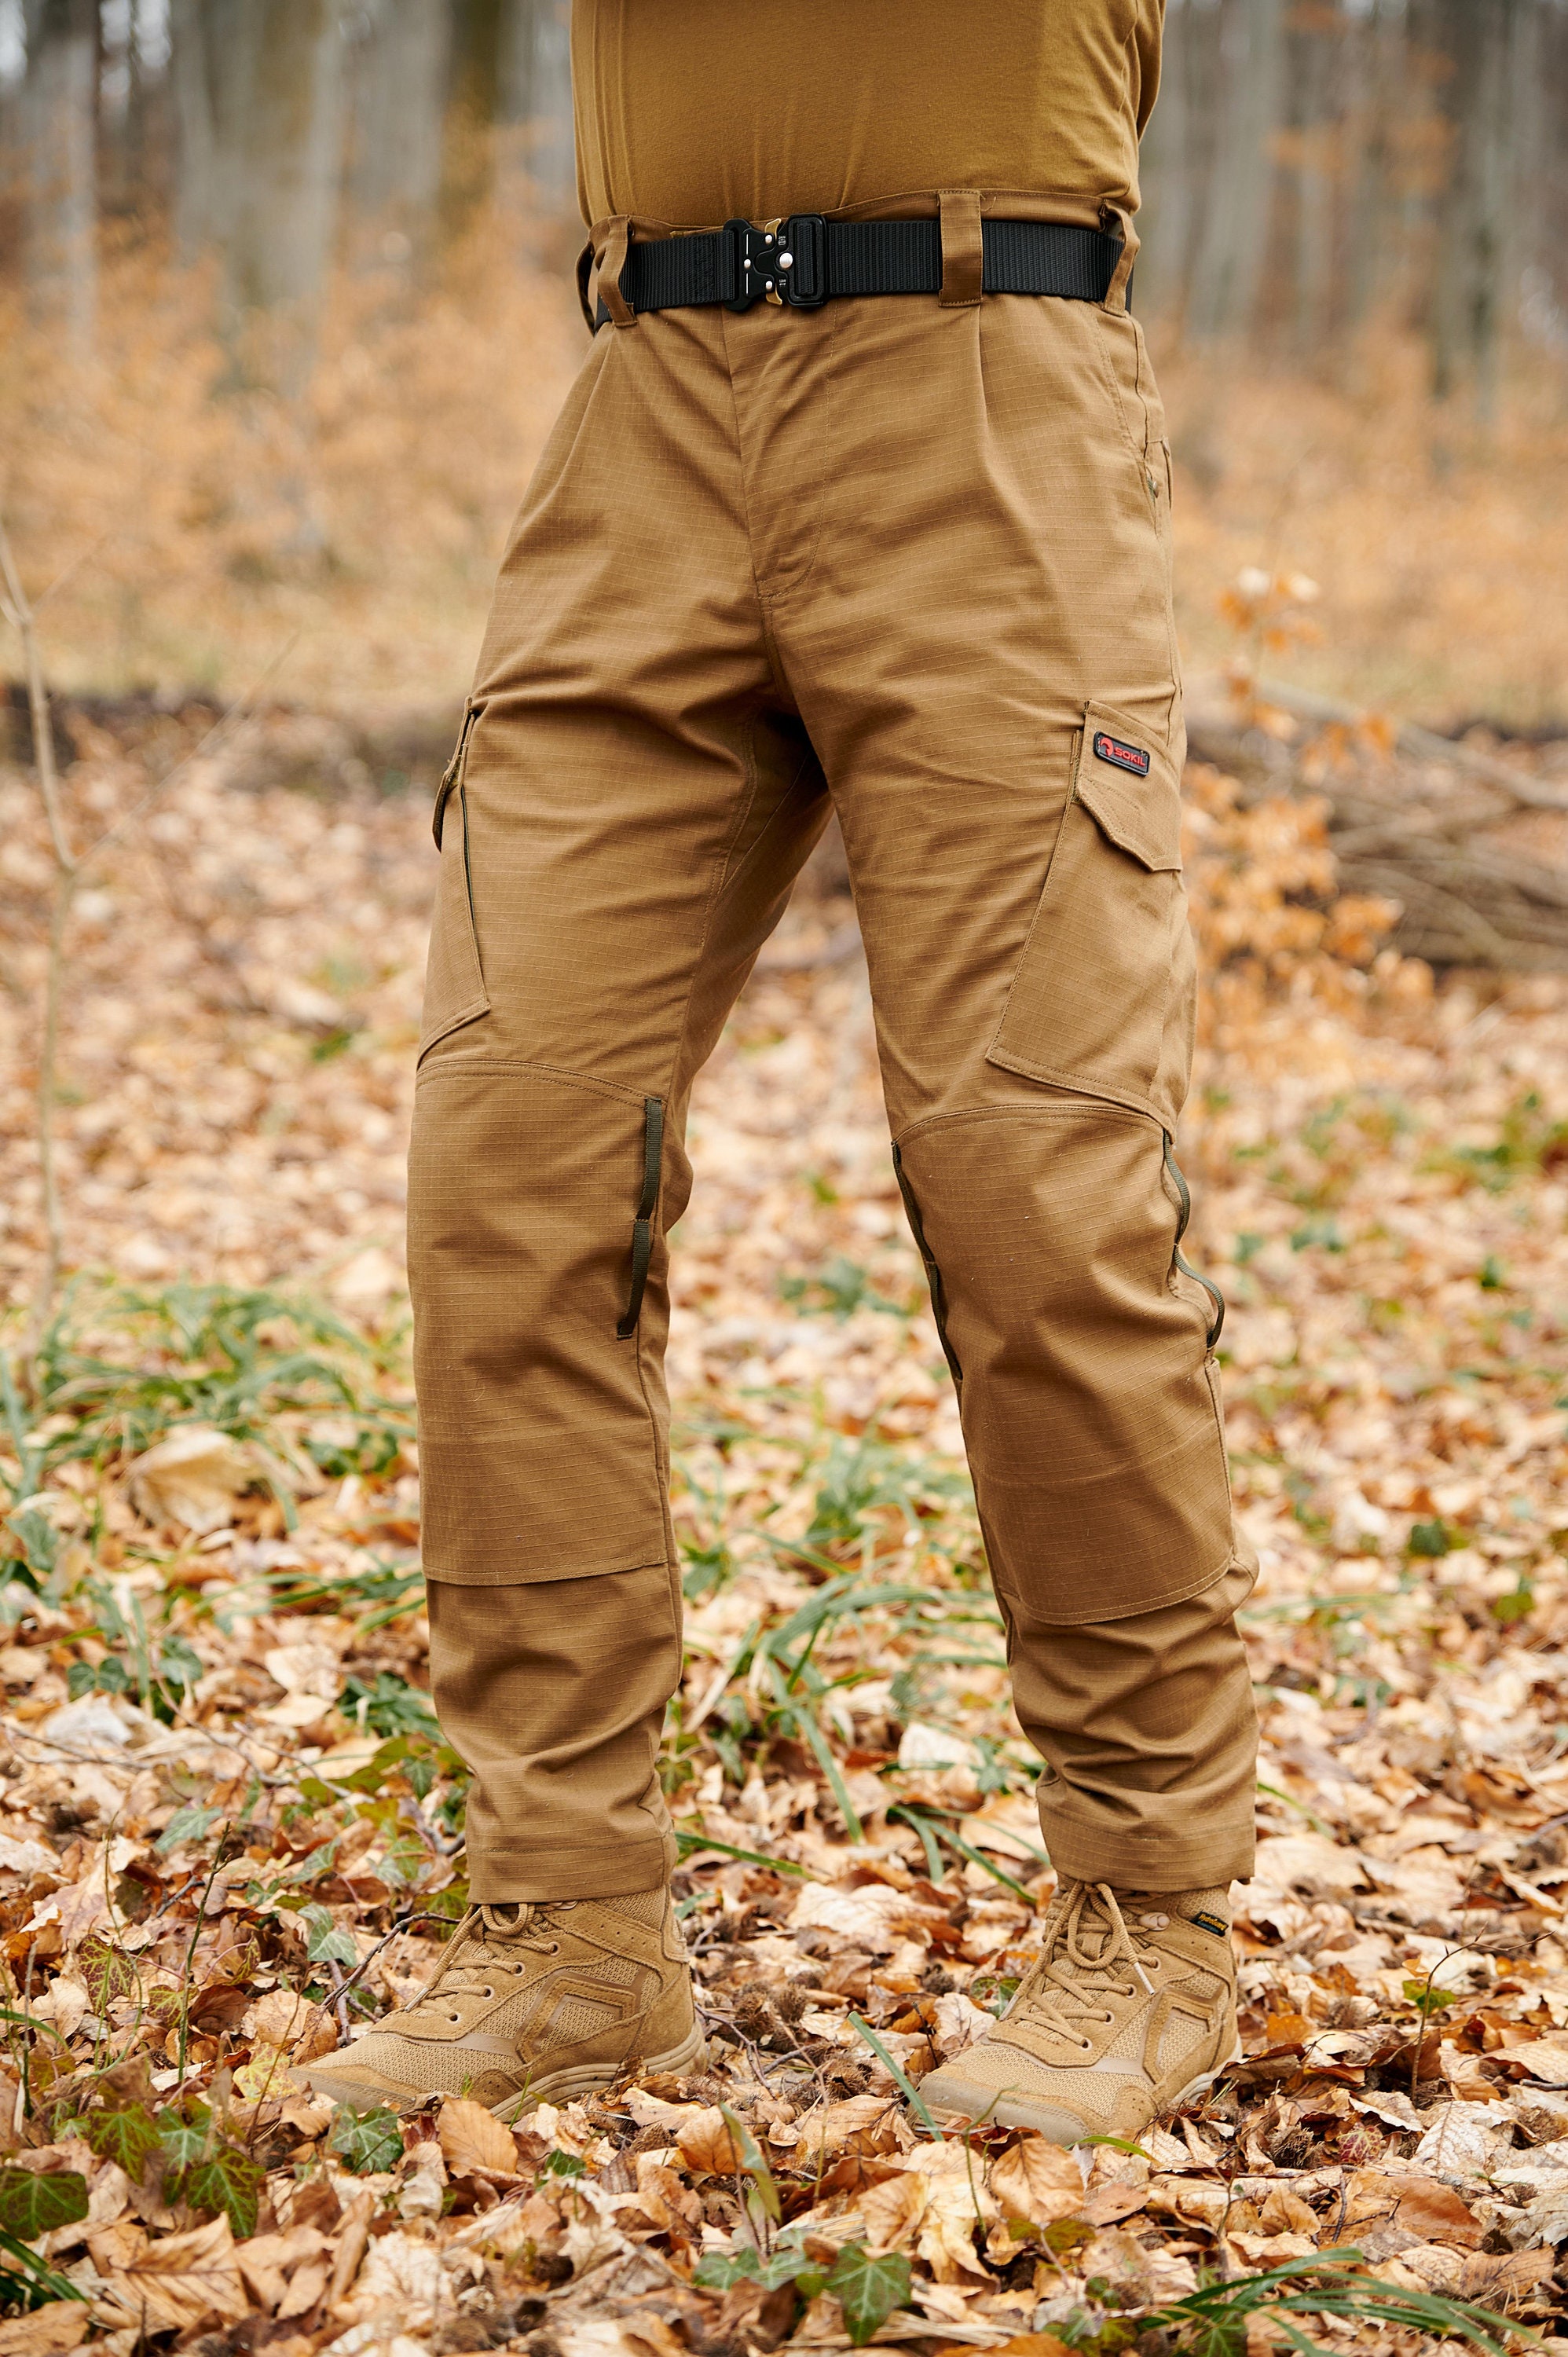 Mens Tactical Battle Ripstop Trousers Camping Hiking Hunting Camo Combat  Pants